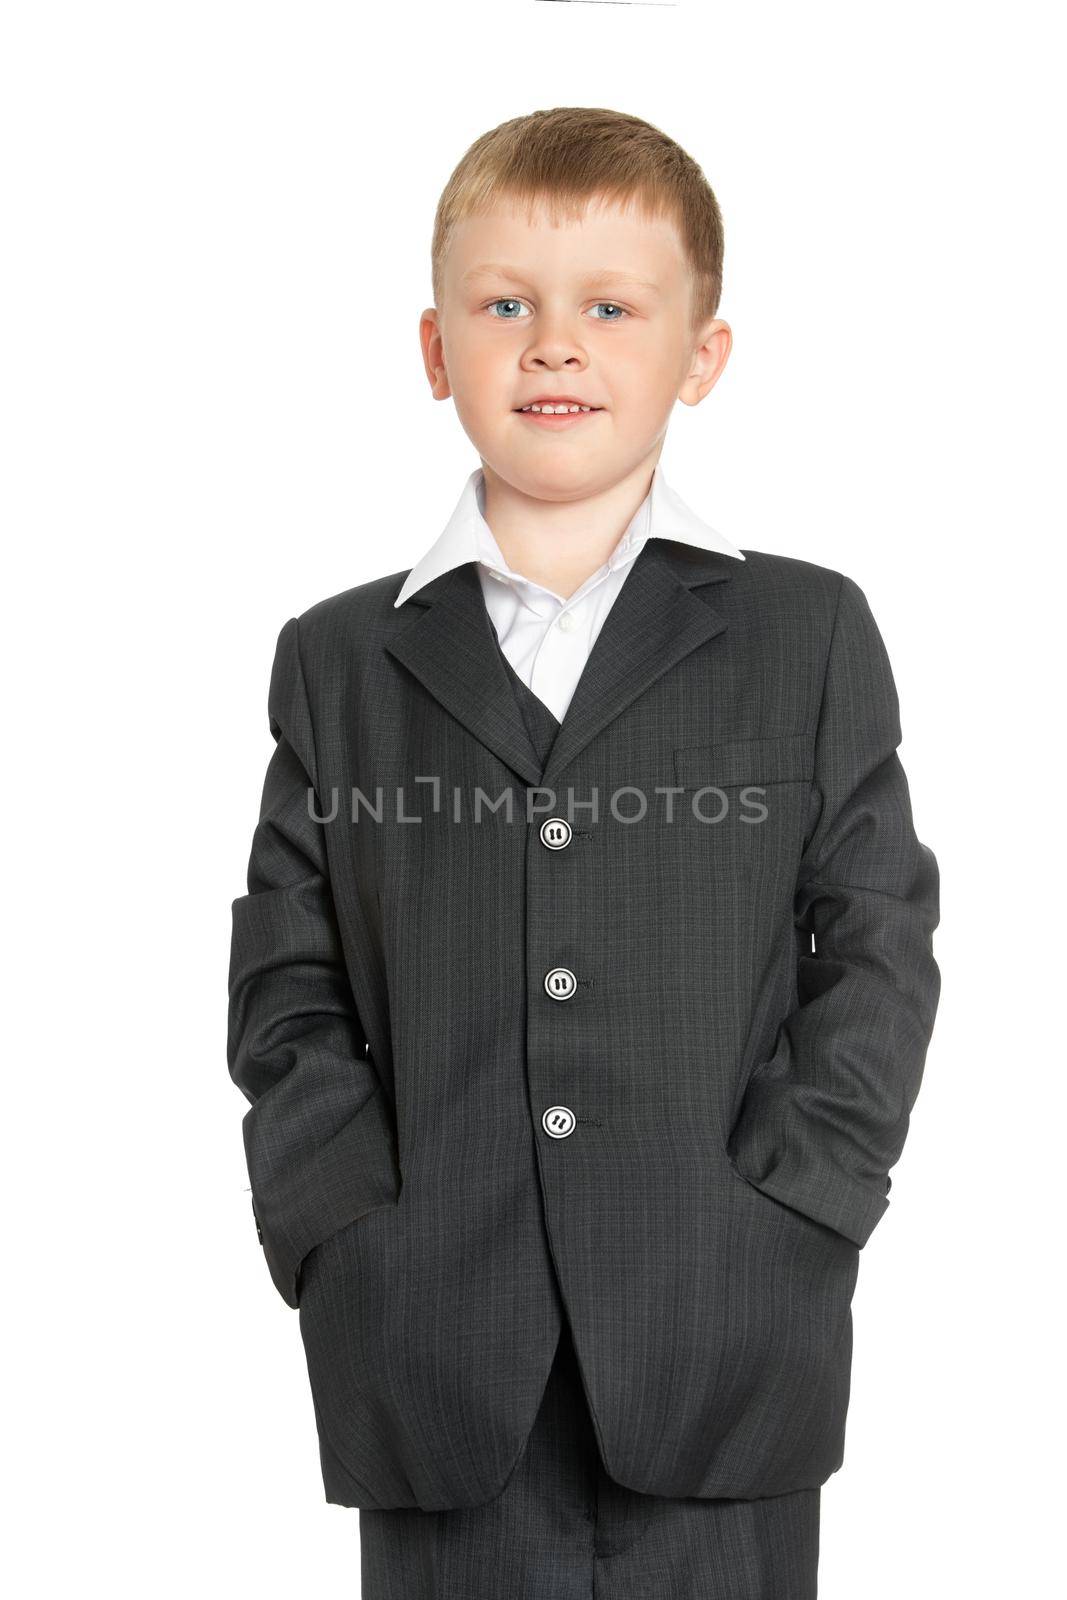 Cute little boy in a suit and white shirt. Put his hands in the pockets of his jacket. Close-up - Isolated on white background